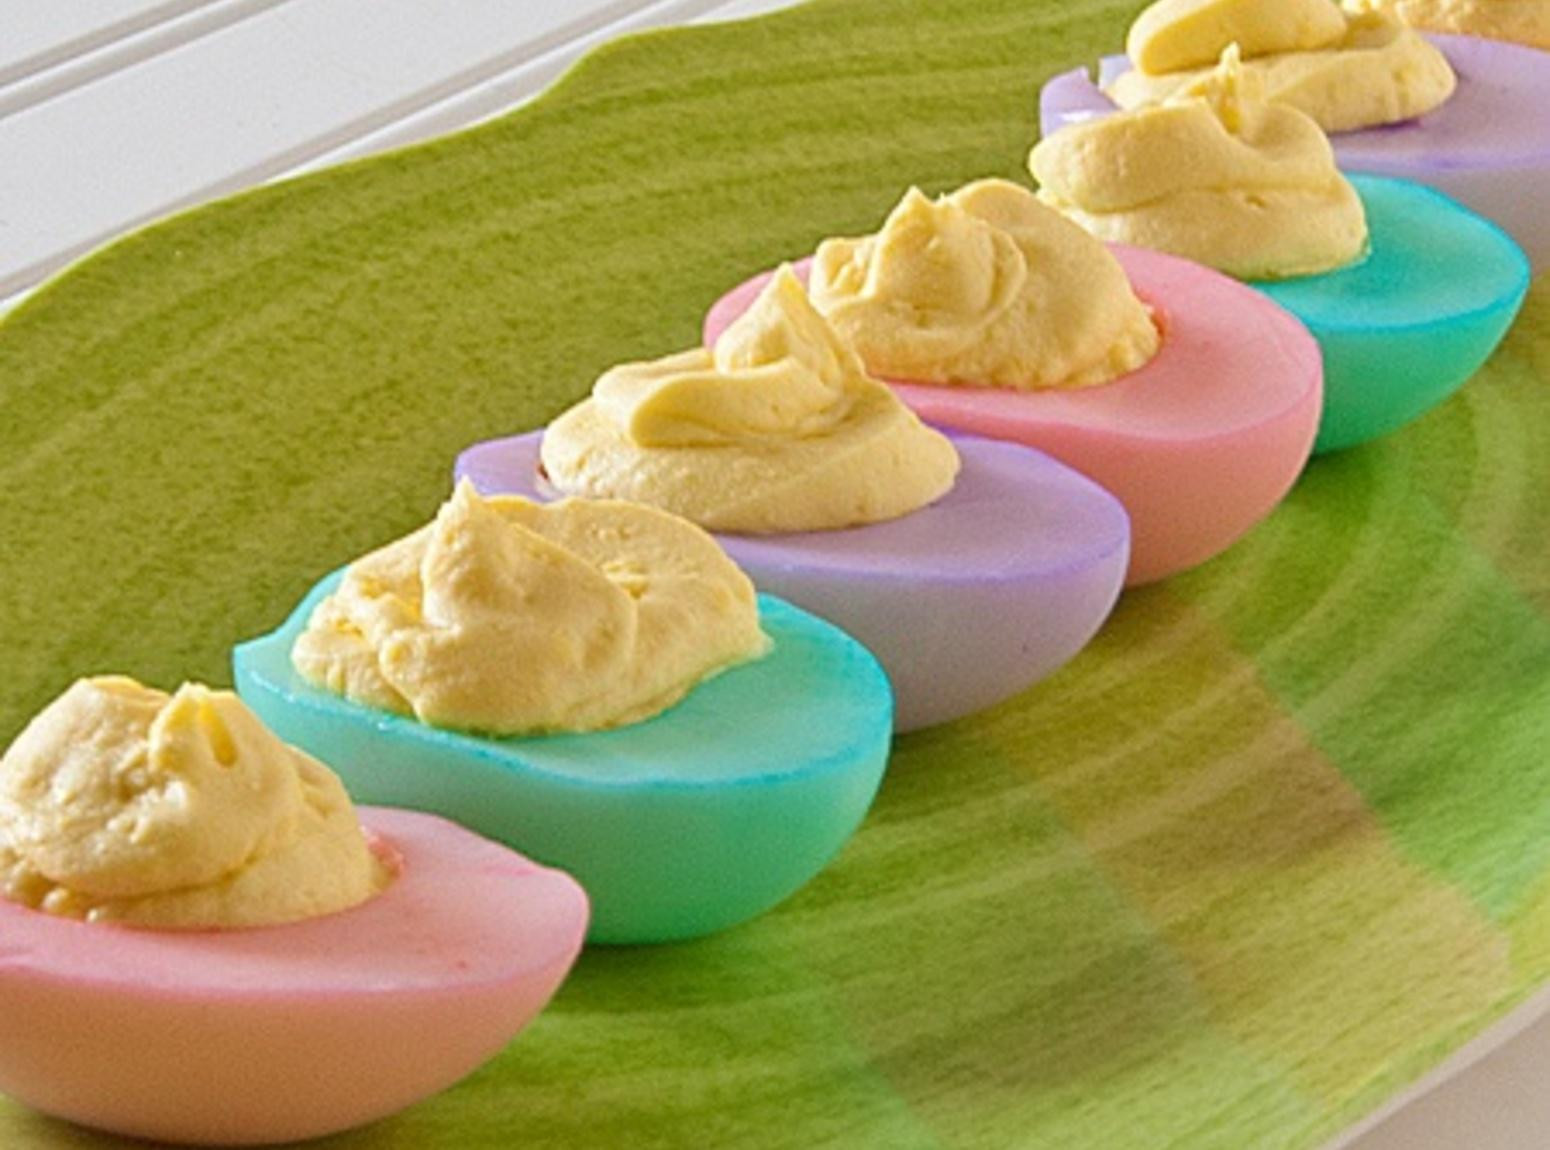 Colored Deviled Eggs For Easter
 Colored deviled eggs Recipe